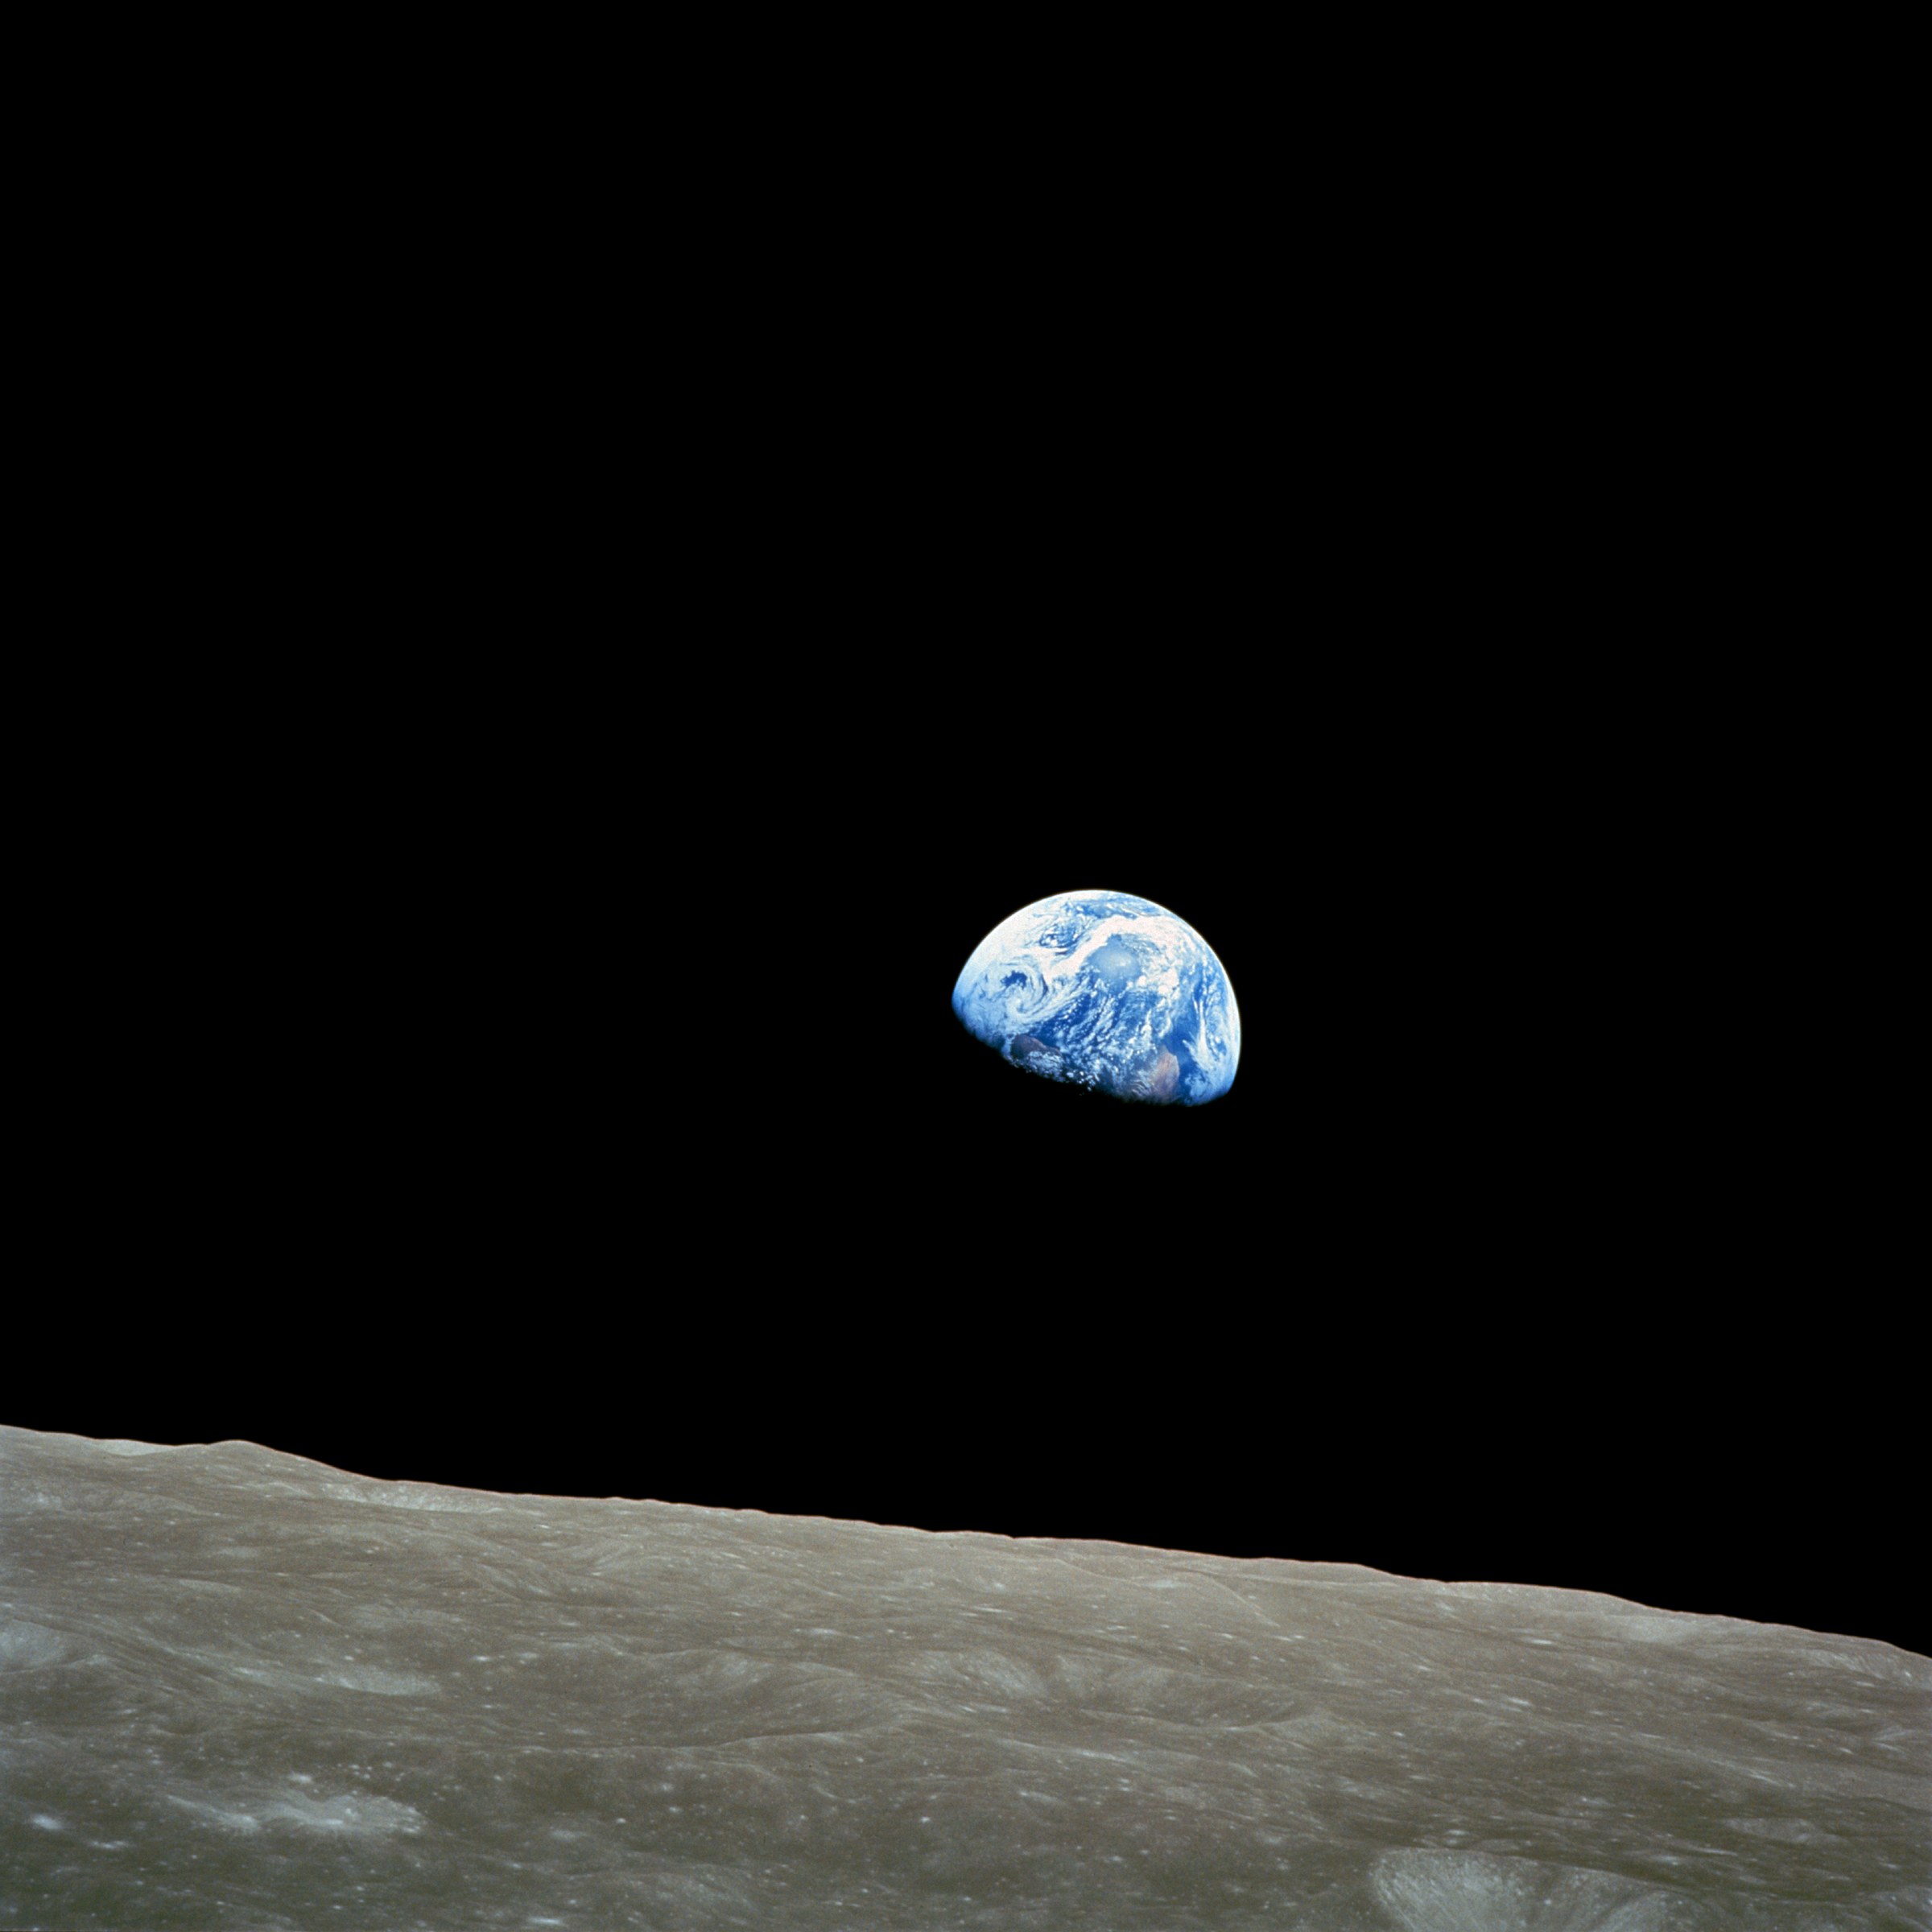 While the Apollo program is legendary, many space enthusiasts born too late missed its pivotal moments, including the famous "Earthrise" seen by Apollo 8 in 1968. Filmmaker Stephen Slater is working on making these moments more accessible - and compelling - for viewers. Photo Credit: NASA/Apollo 8 crew